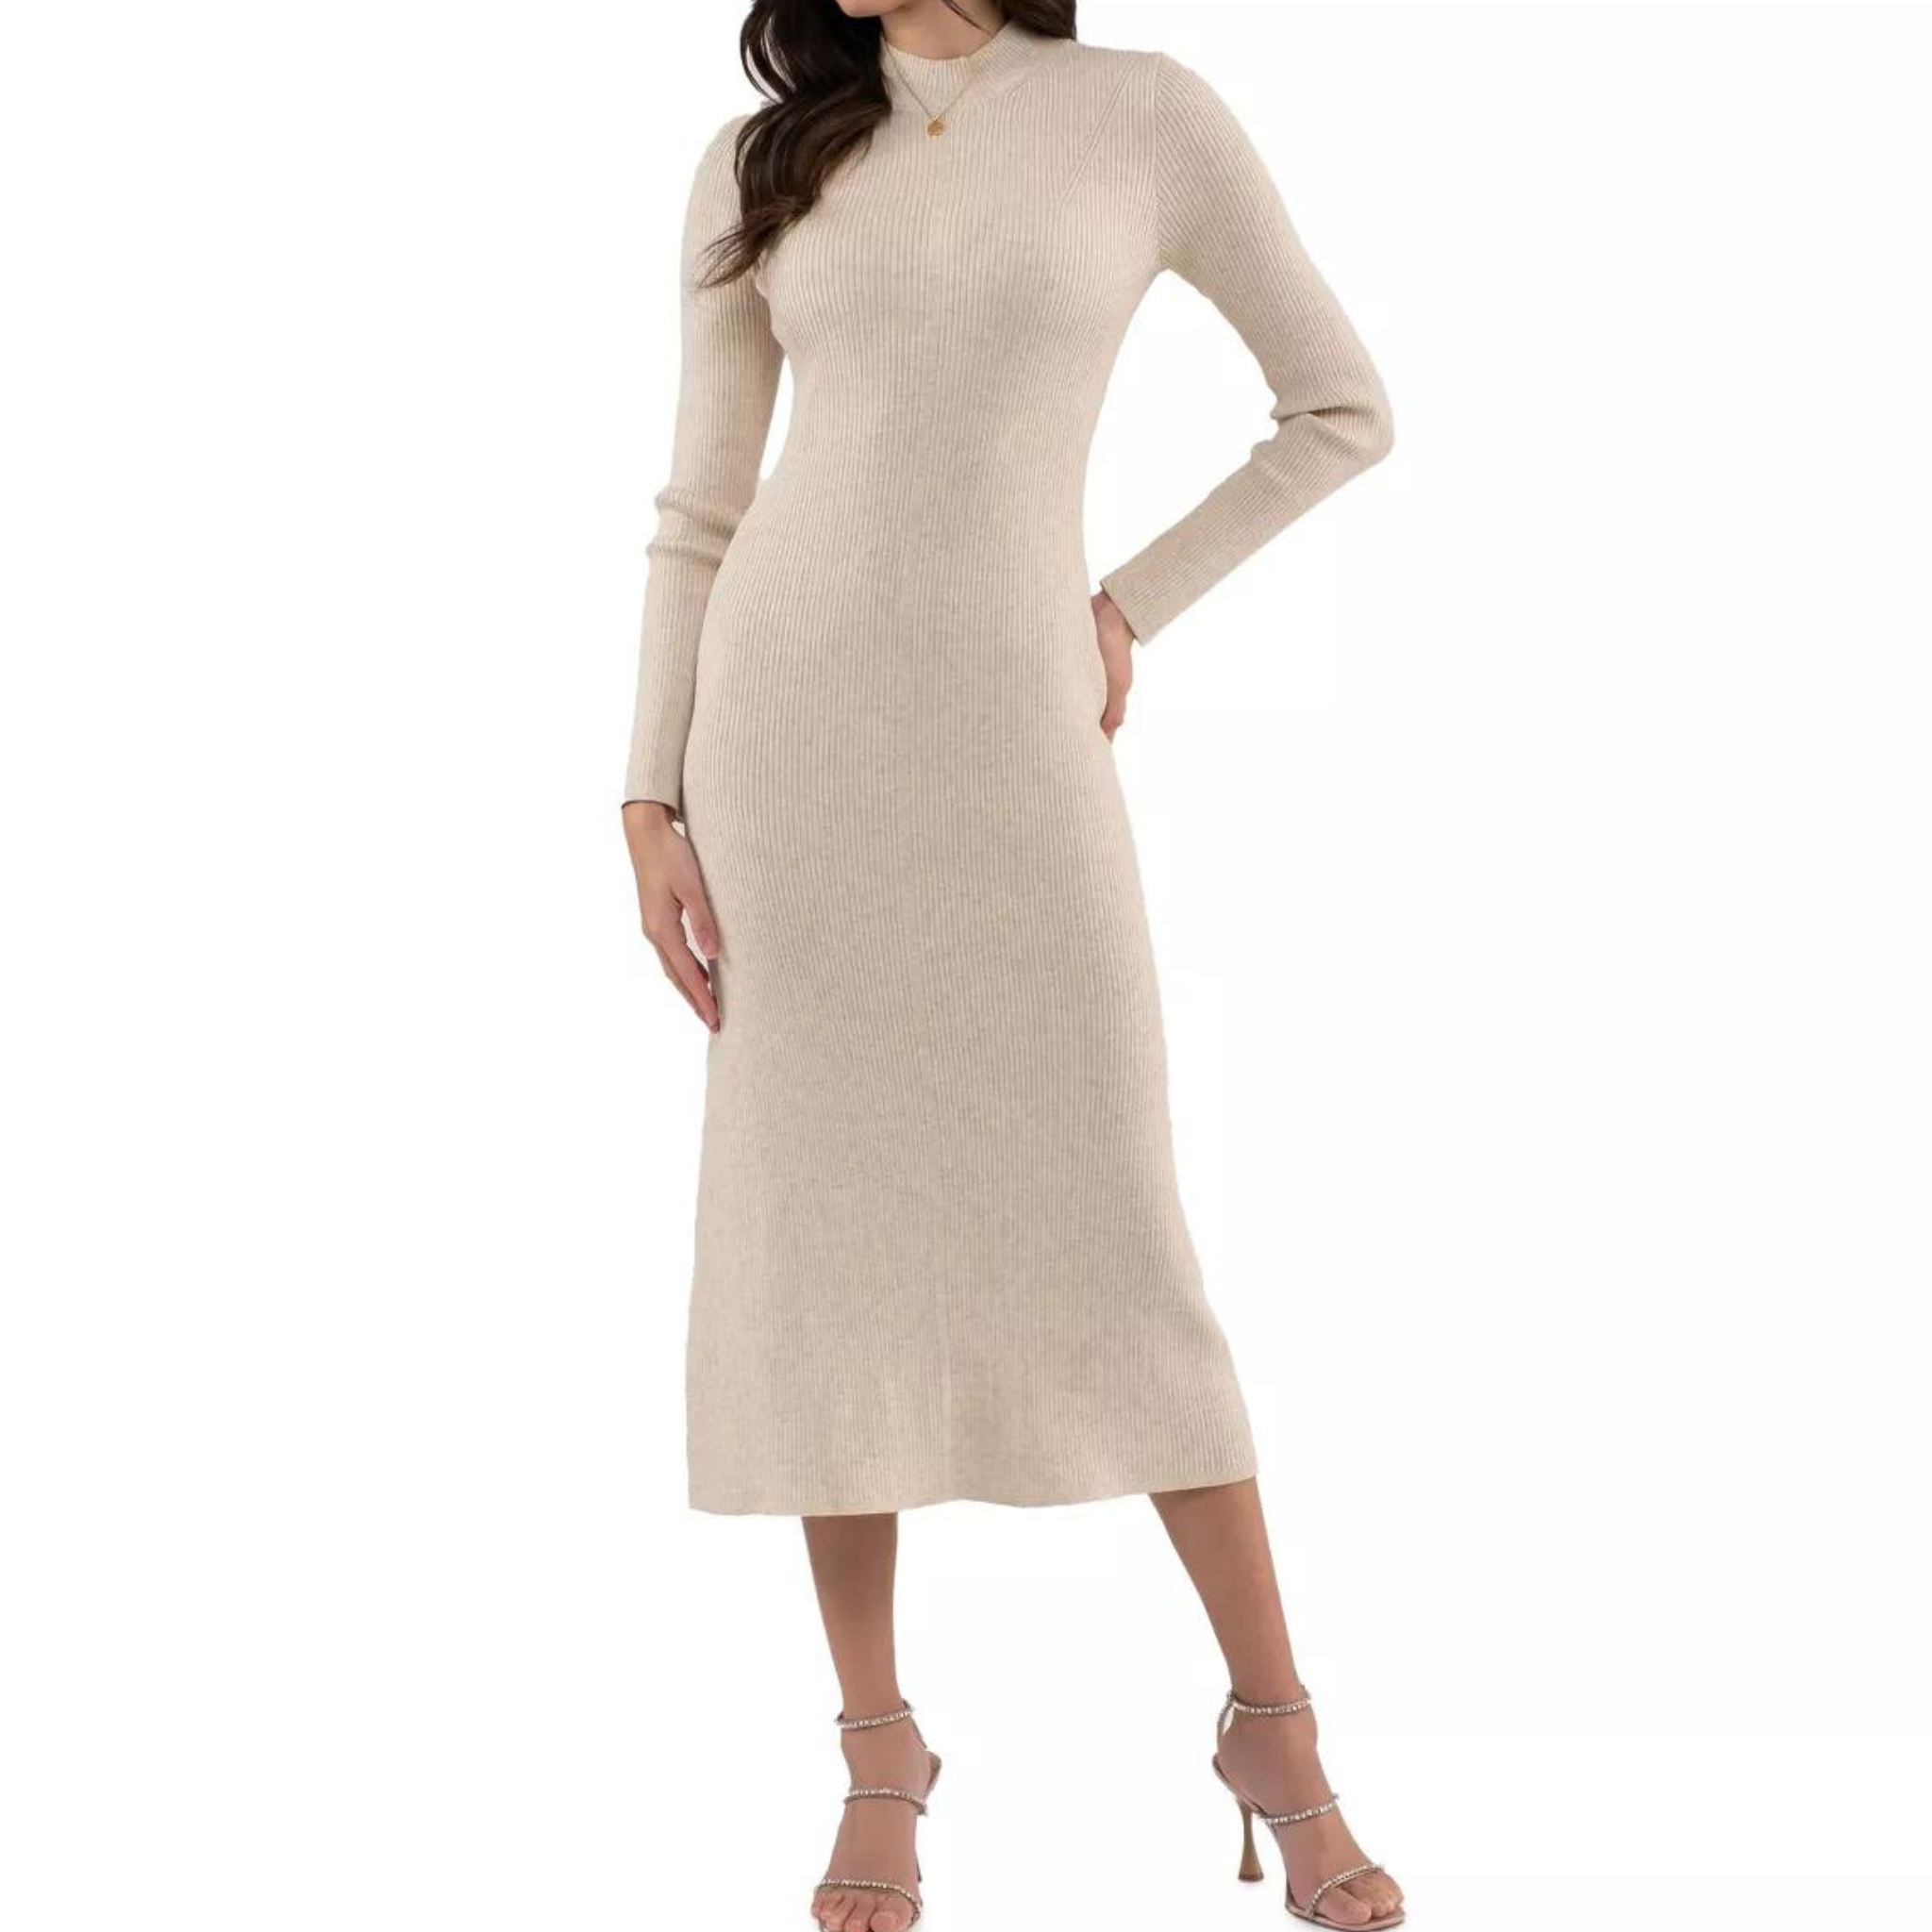 Target Shimmery Ribbed High Neck Midi Sweater Dress (3 COLORS)